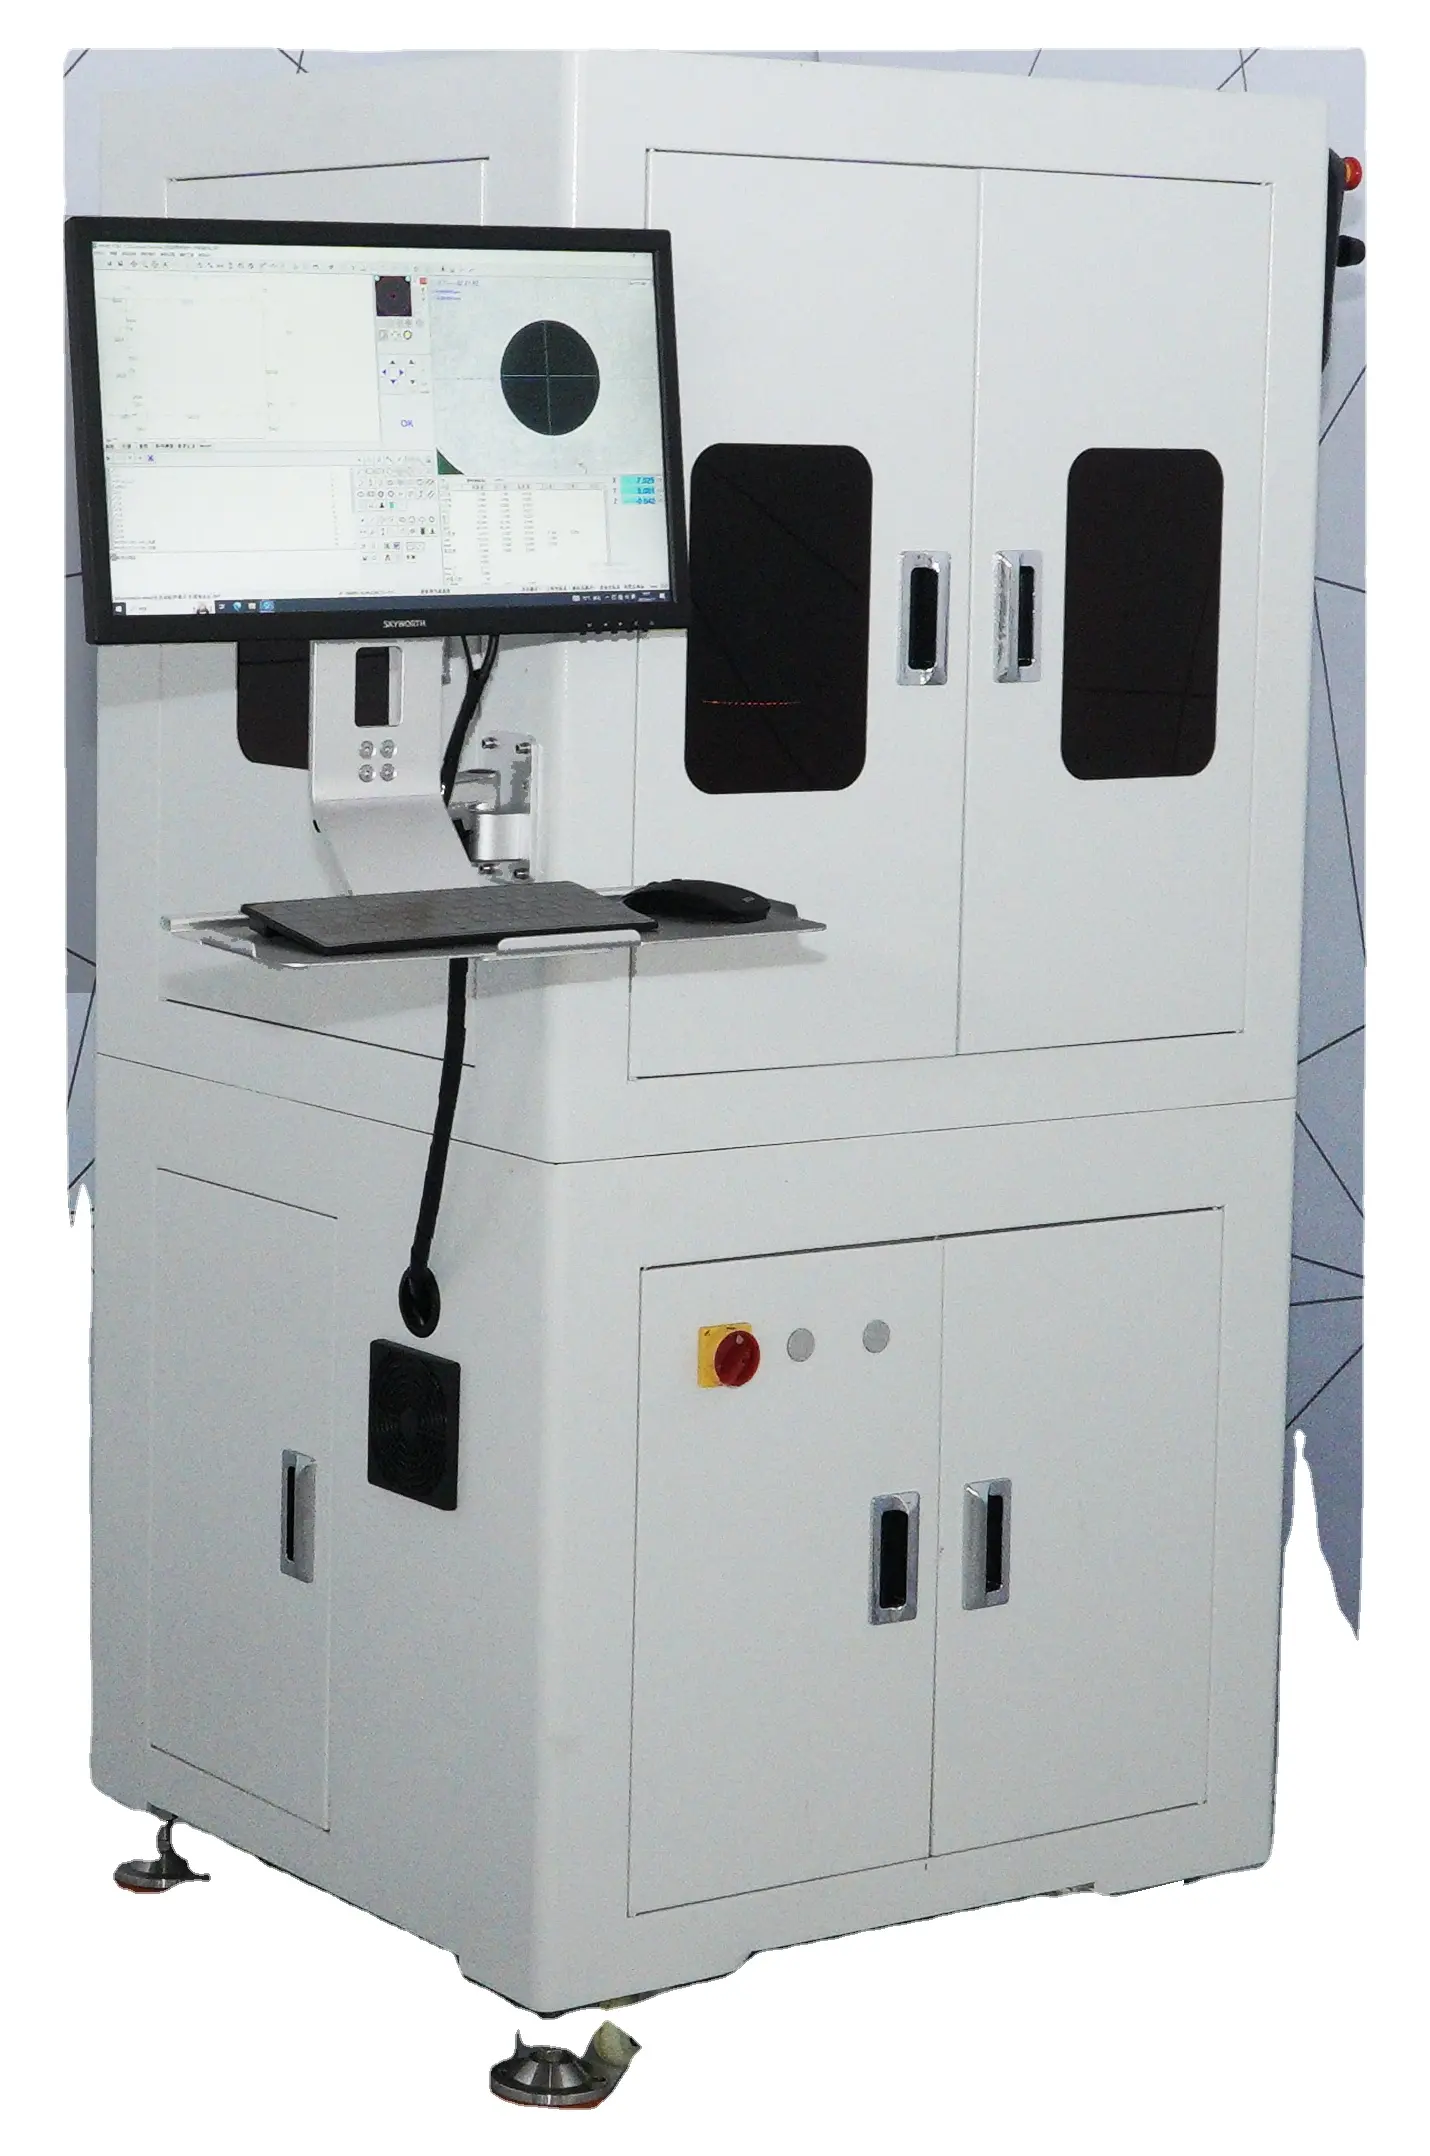 Customized high-precision three-dimensional automatic size measuring instrument for industrial machinery measurement